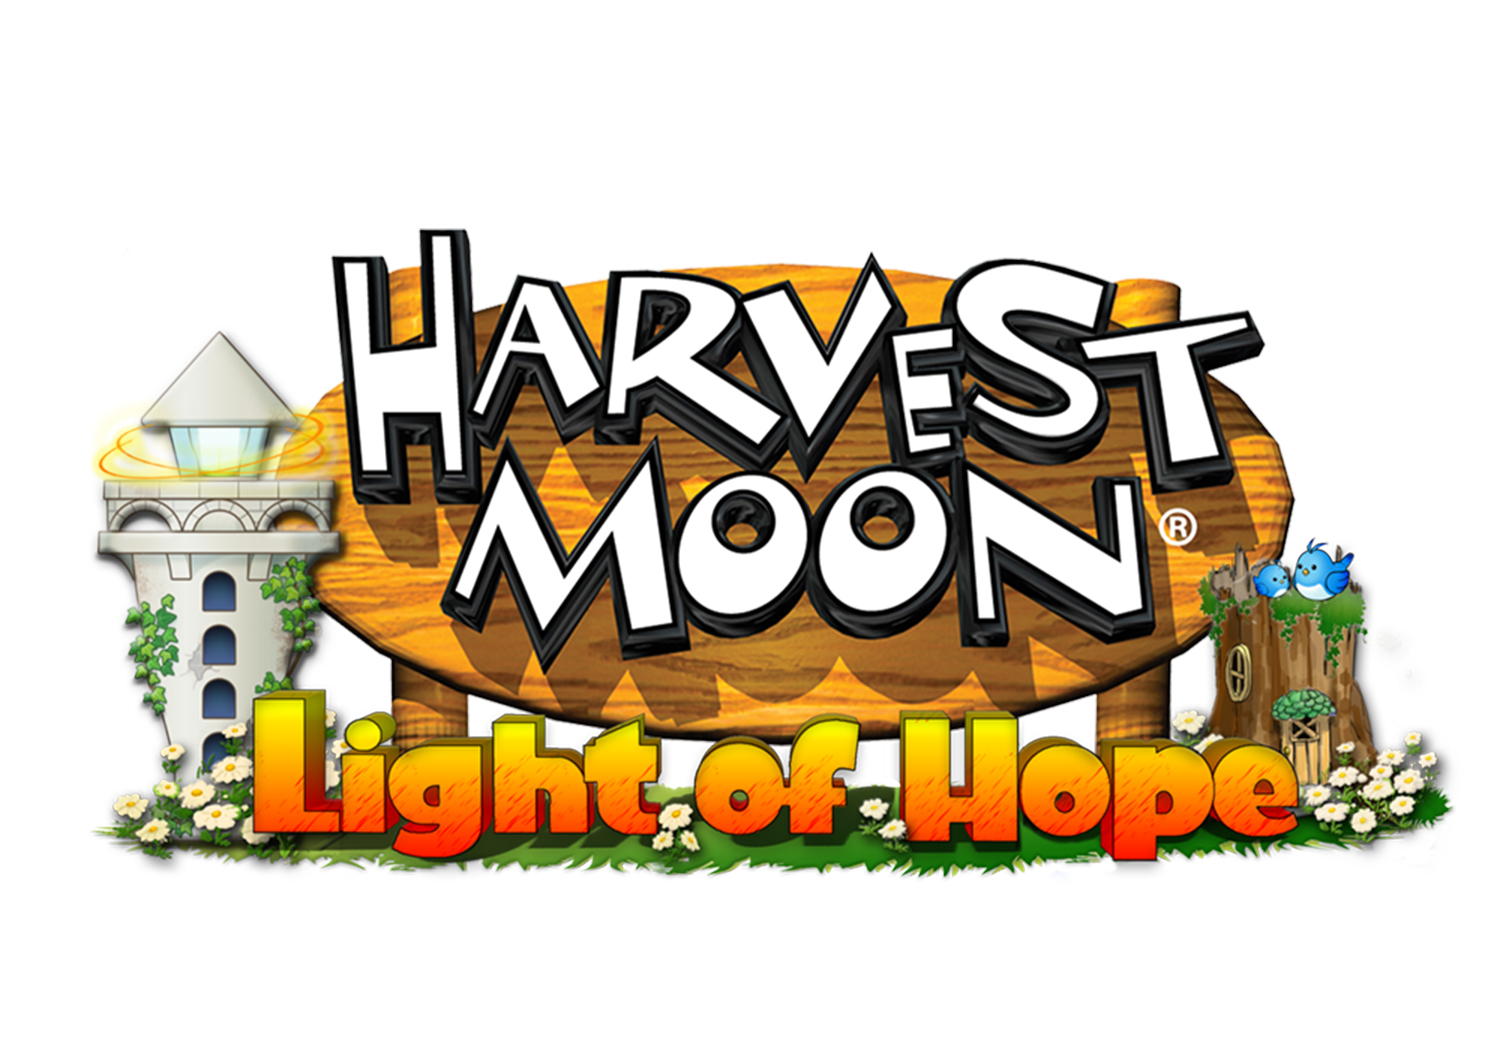 NEWS – Natsume Announces Harvest Moon: Light of Hope for Switch, PS4 and PC